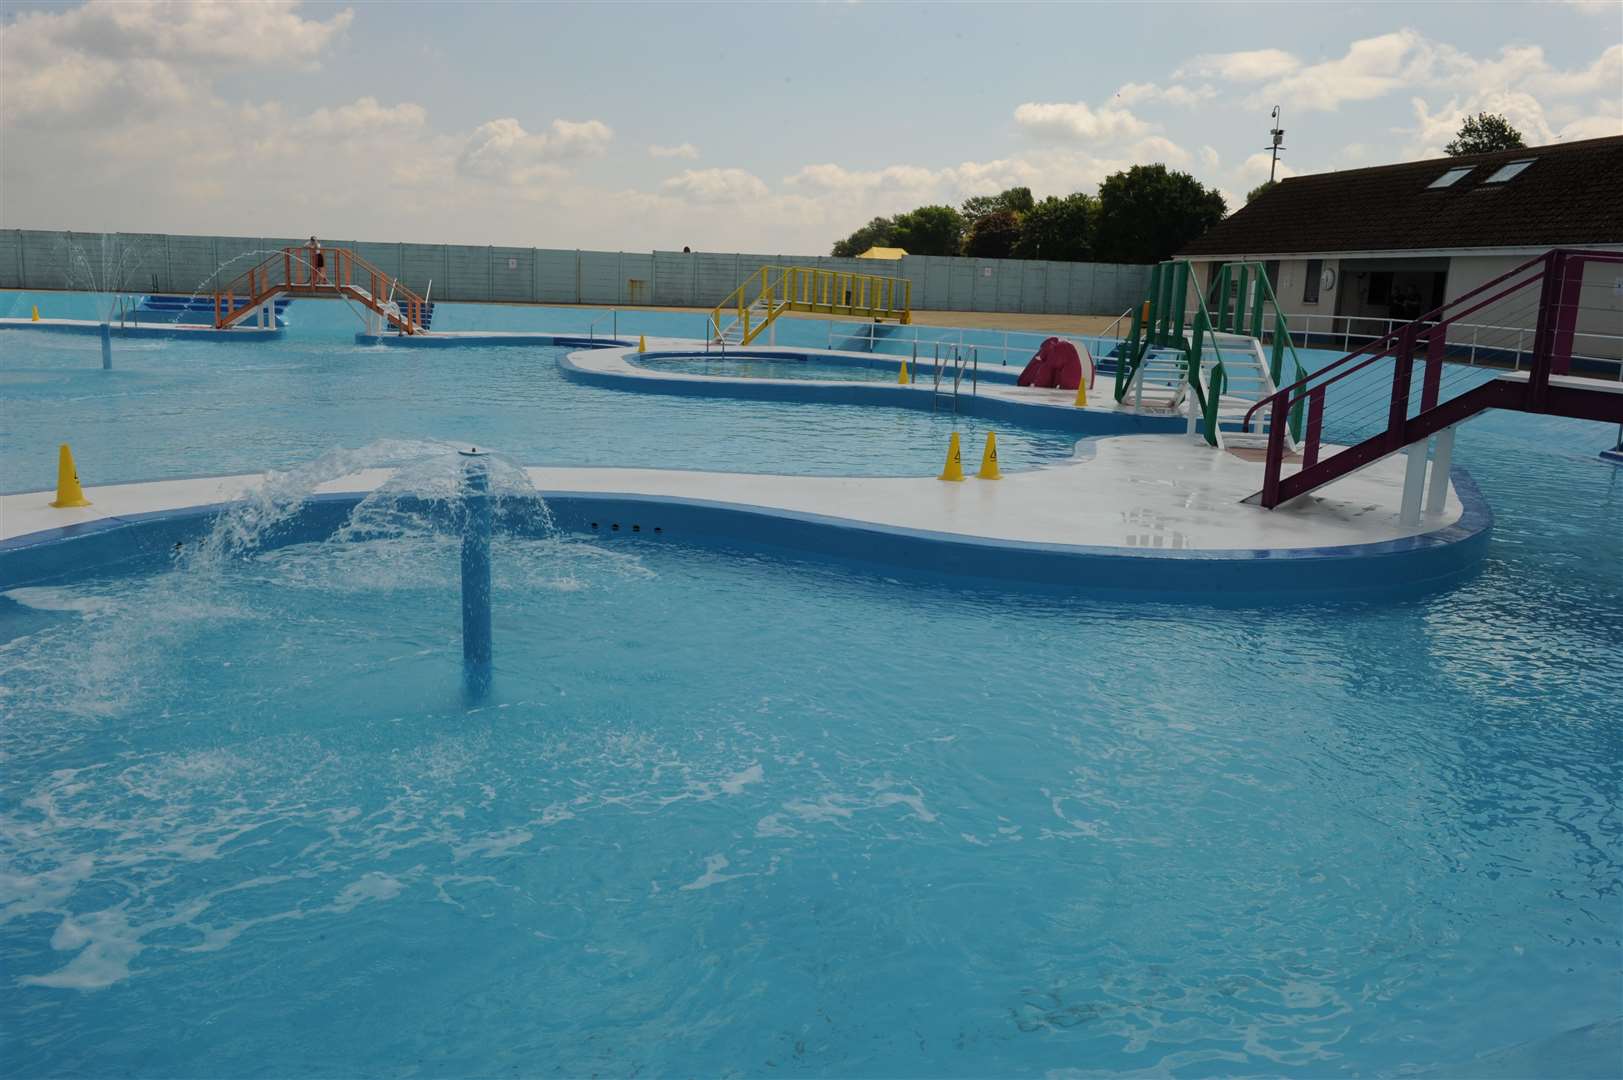 The Strand, in Gillingham, has a popular outdoor pool